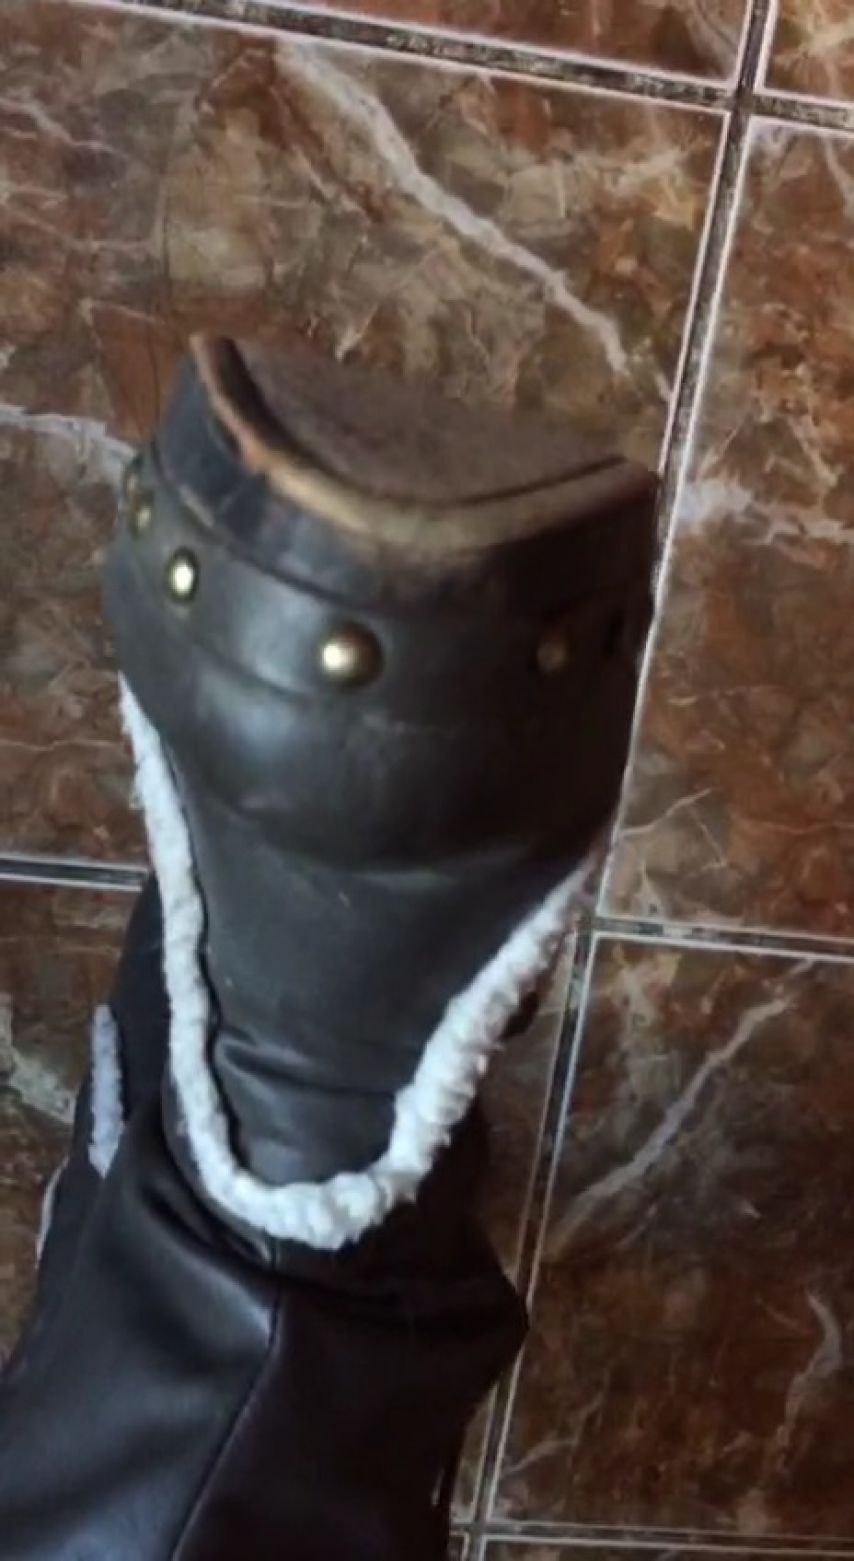 Boots cleaning